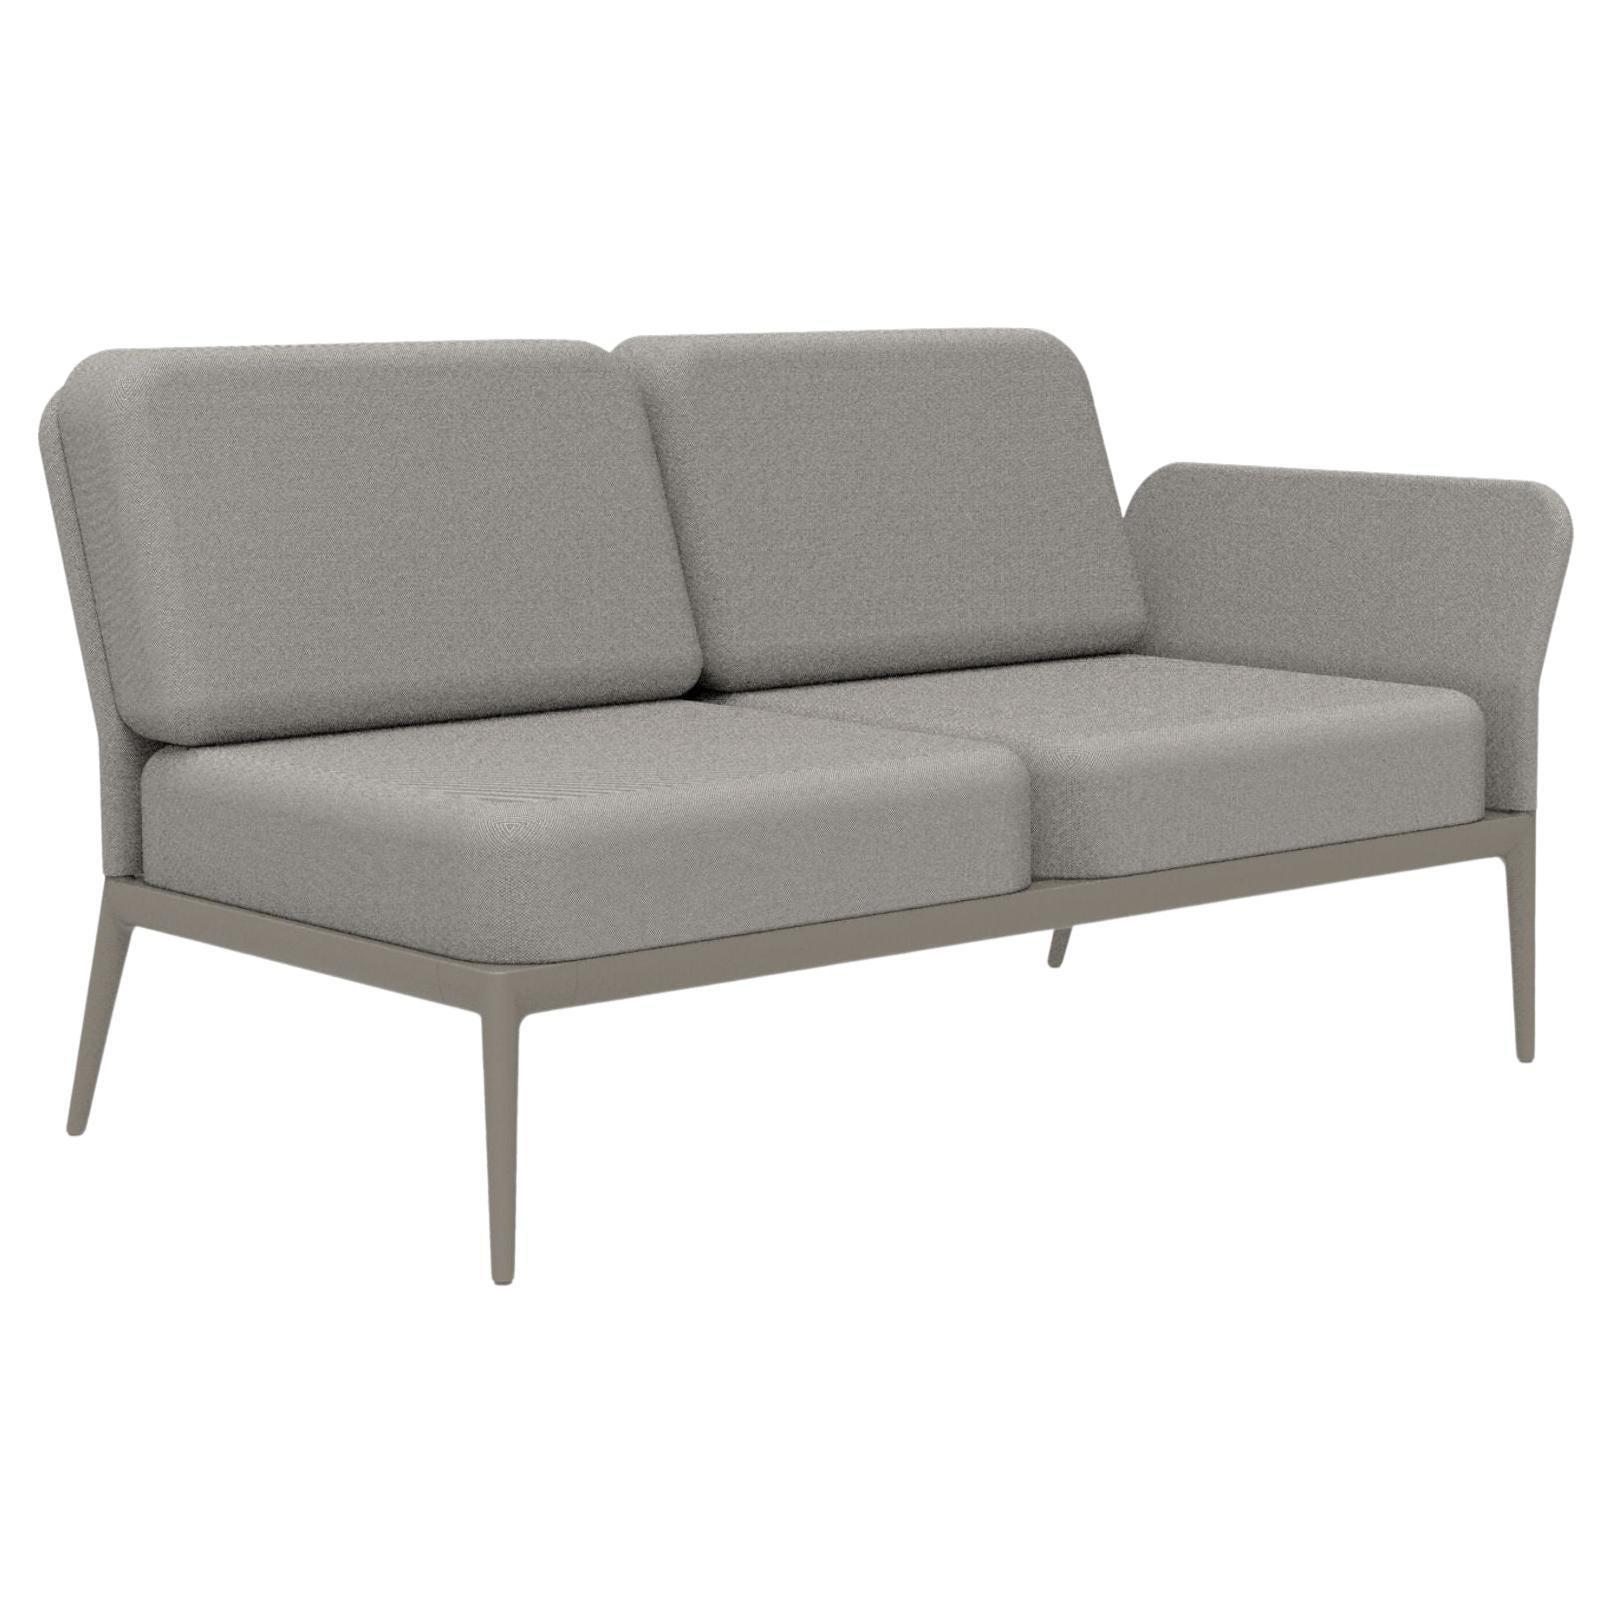 Cover Cream Double Left Modular Sofa by MOWEE For Sale